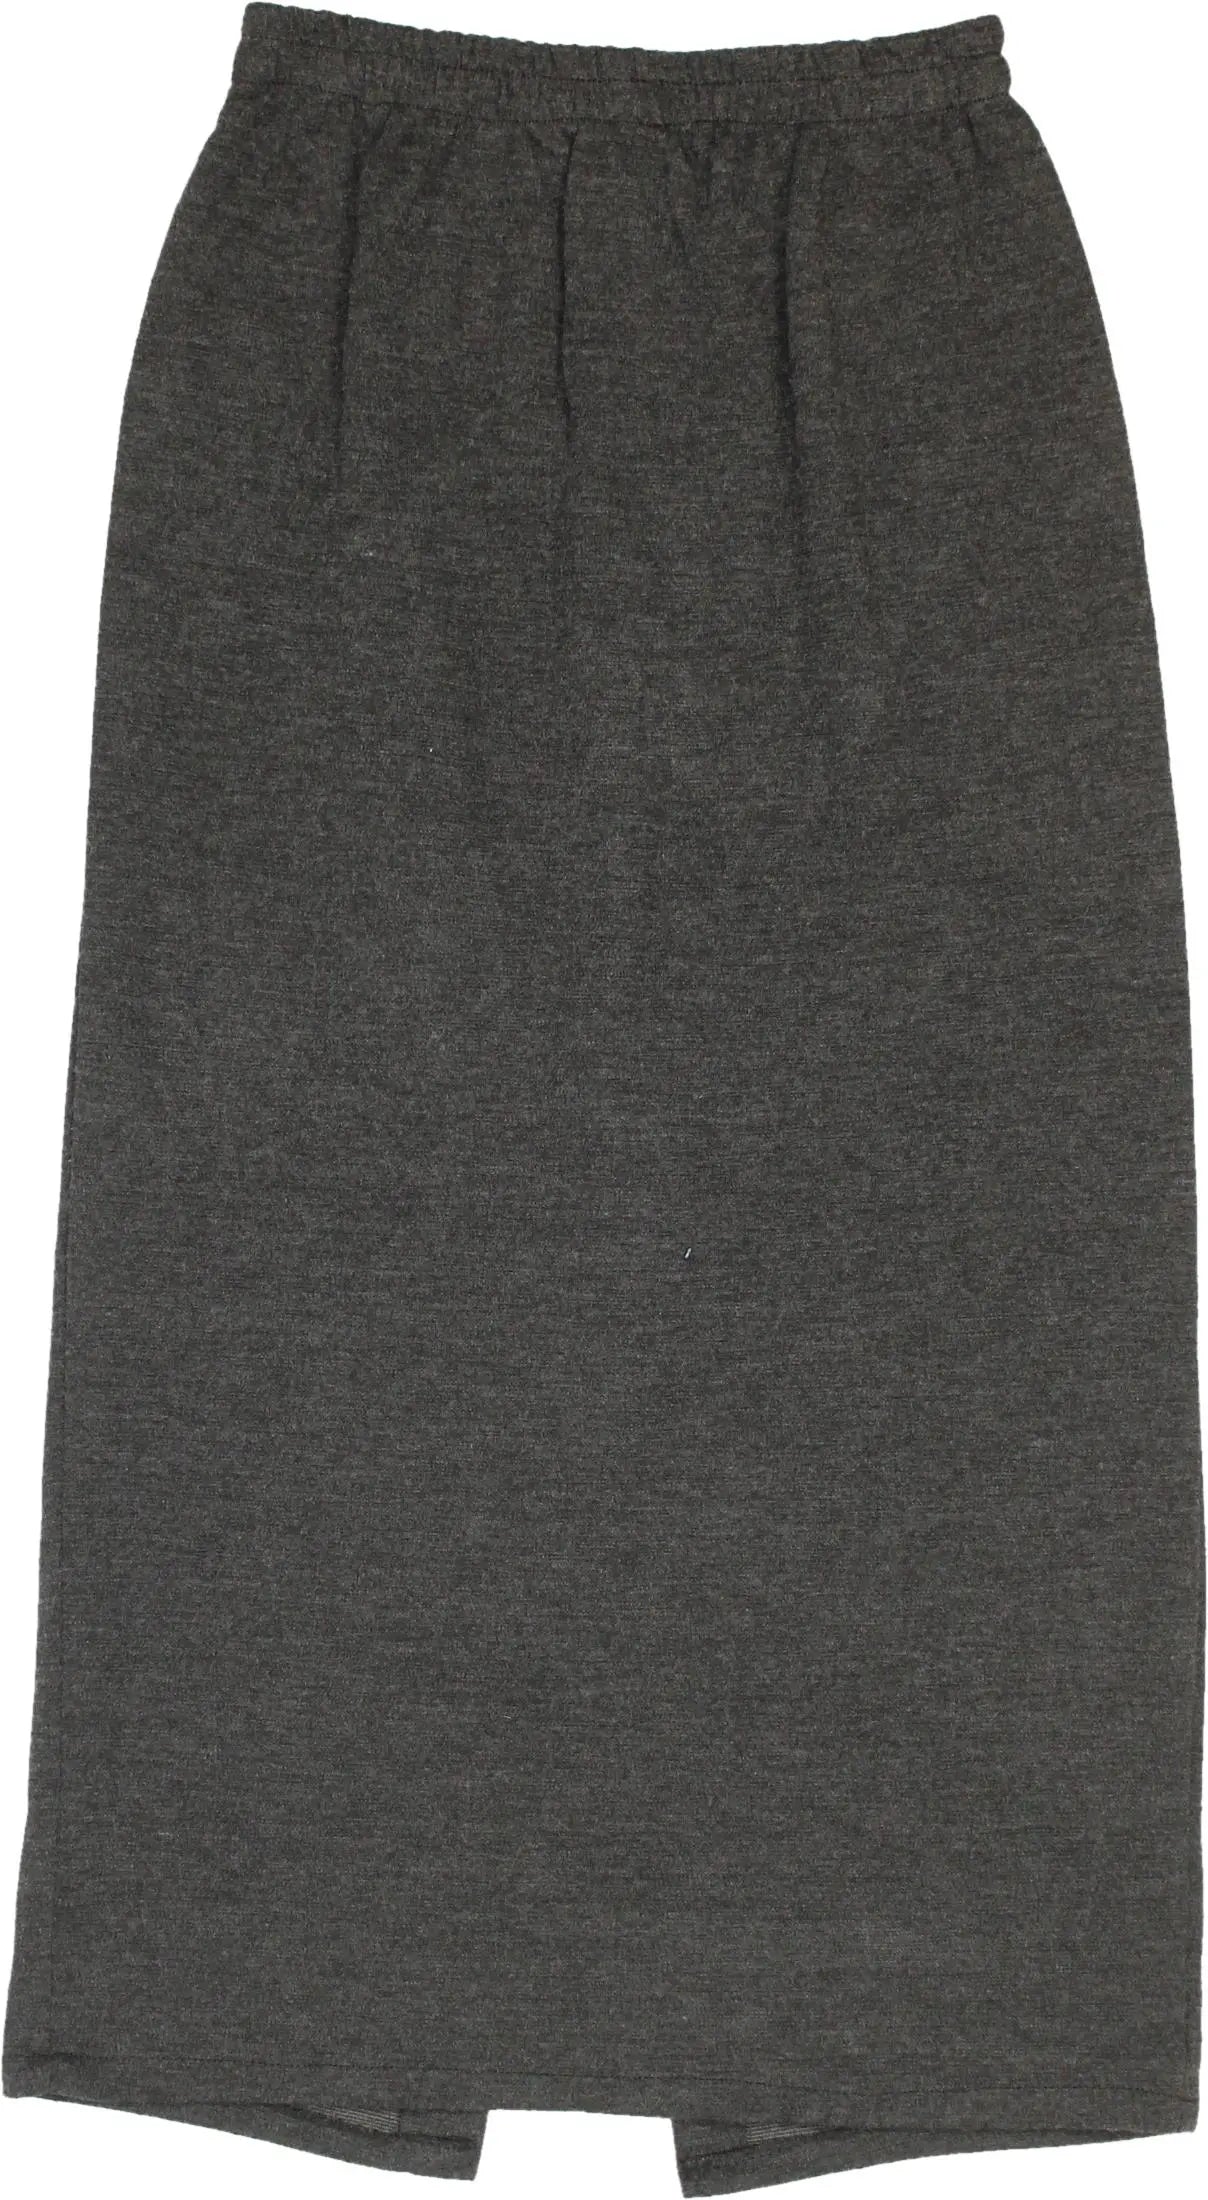 Unknown - Grey pencil skirt- ThriftTale.com - Vintage and second handclothing